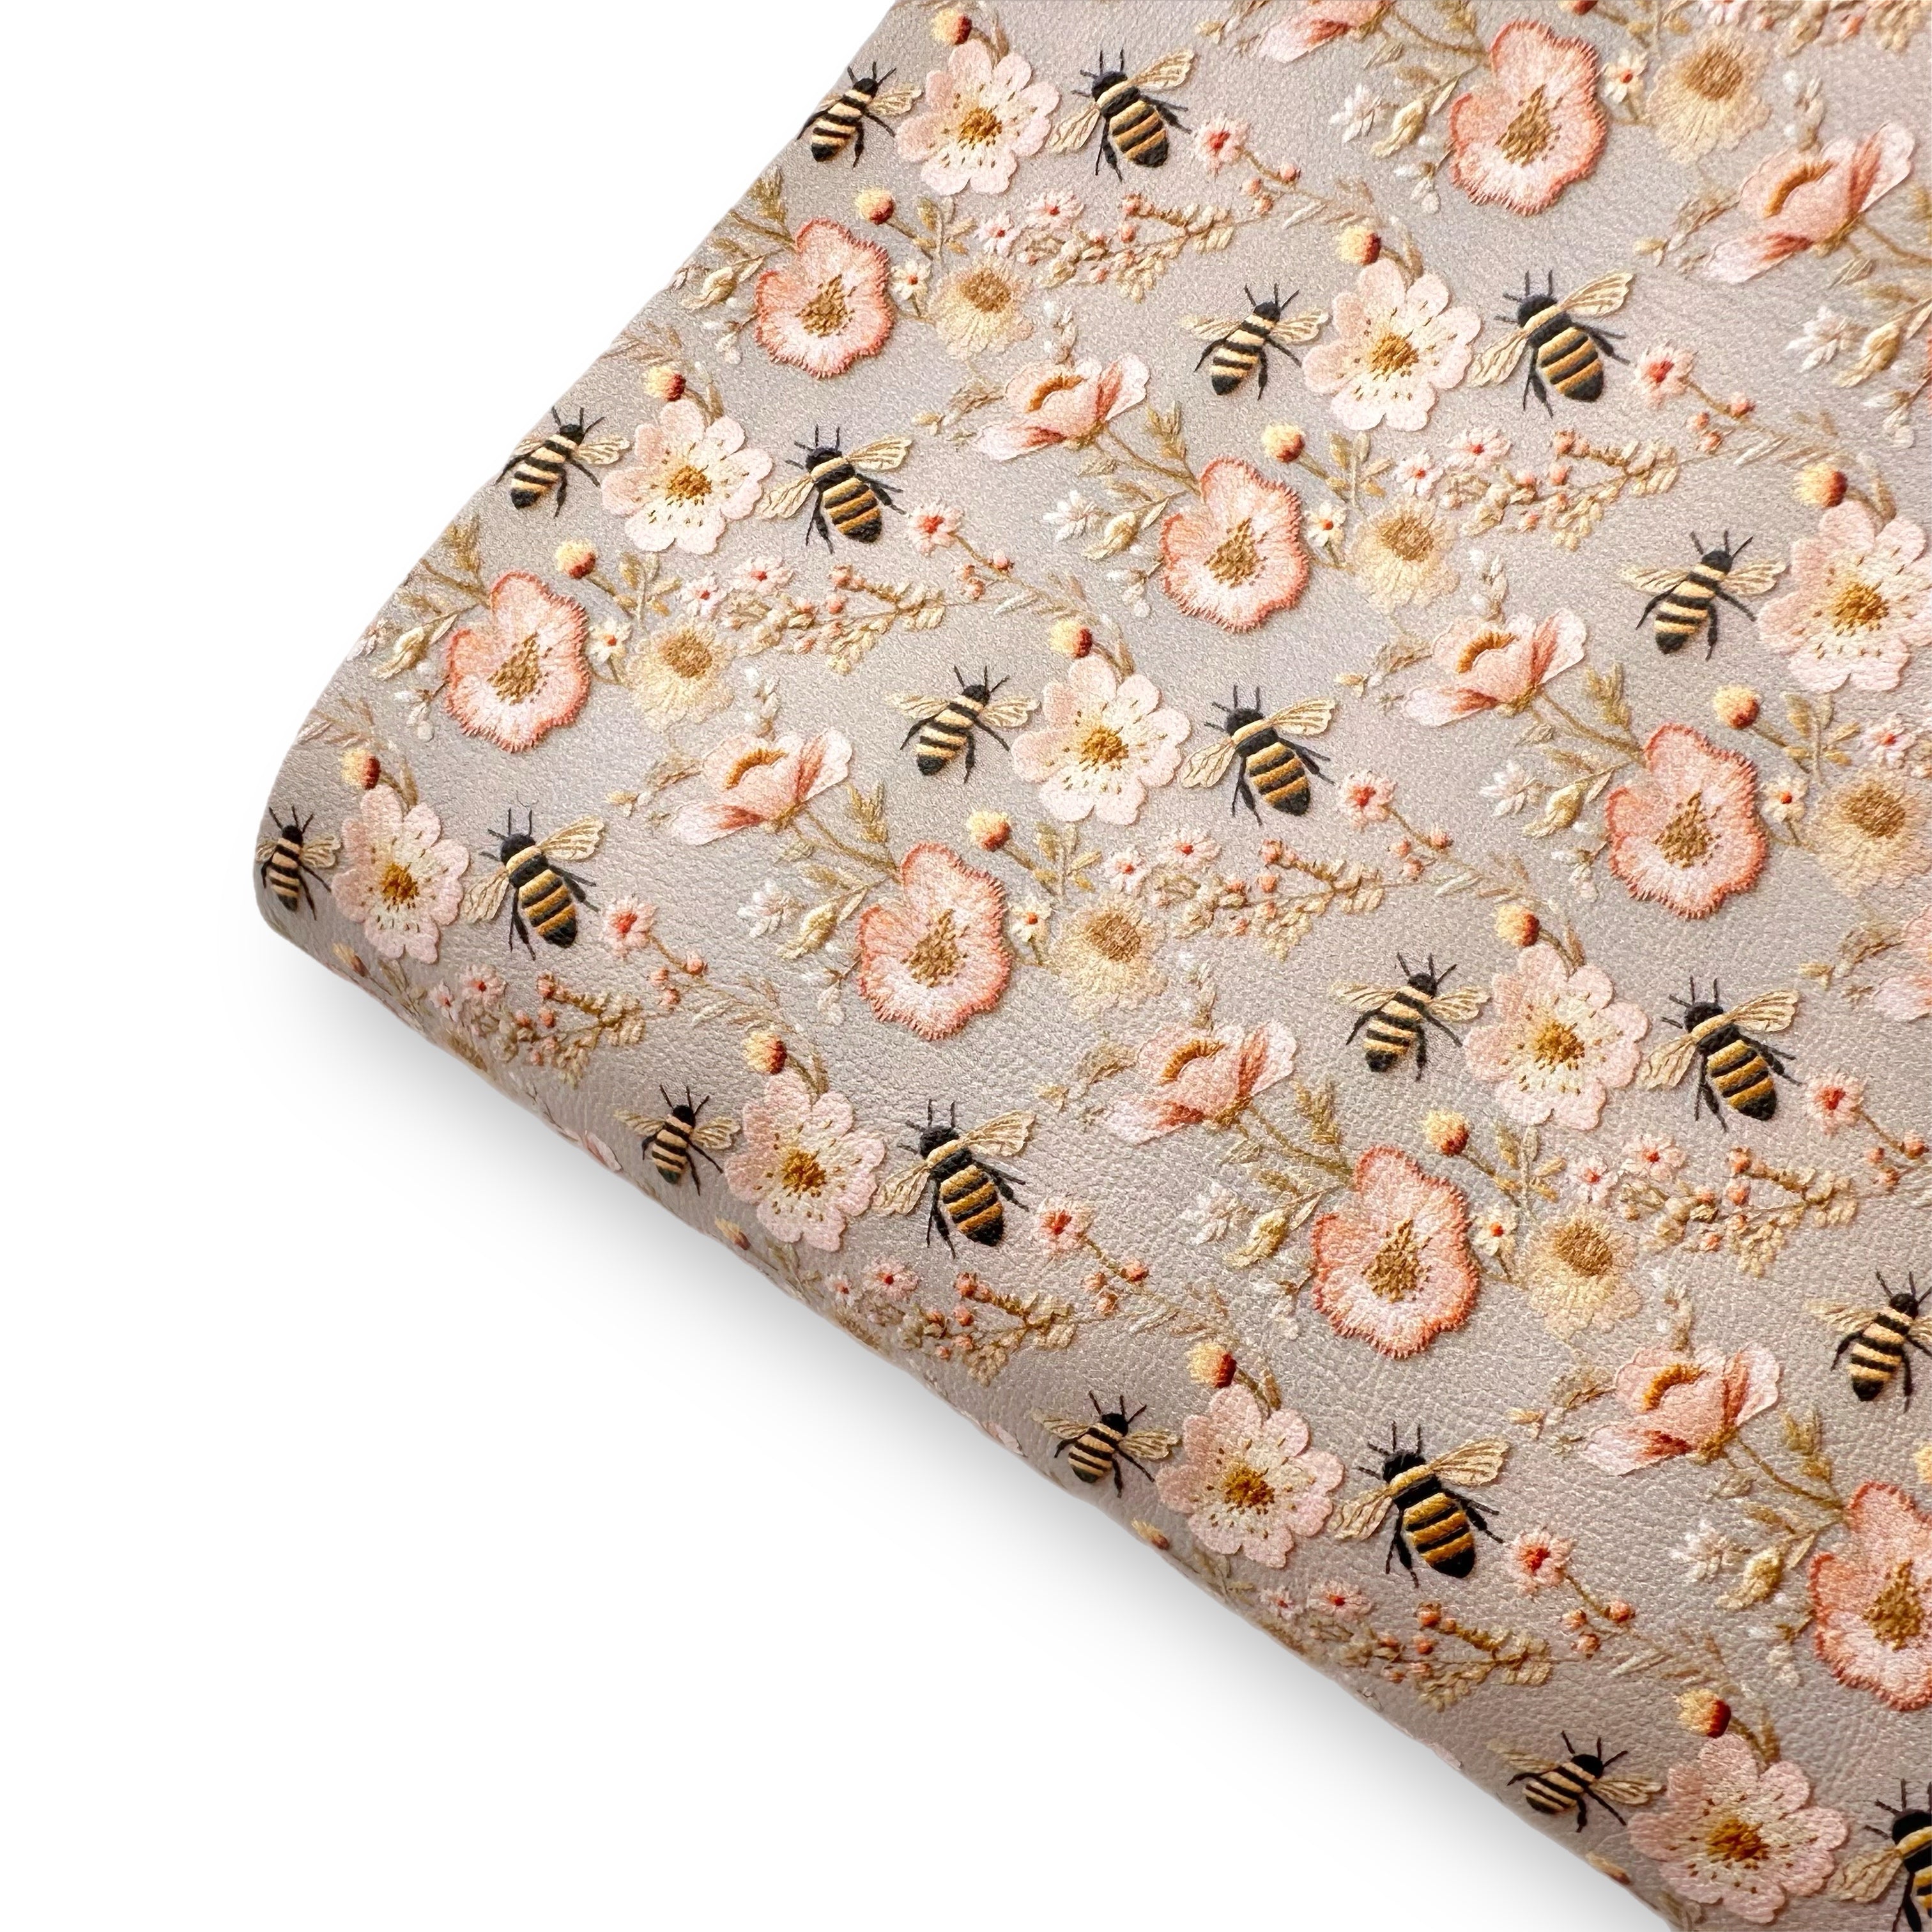 Golden Bee Embroidery Floral 3D Premium Faux Leather Fabric